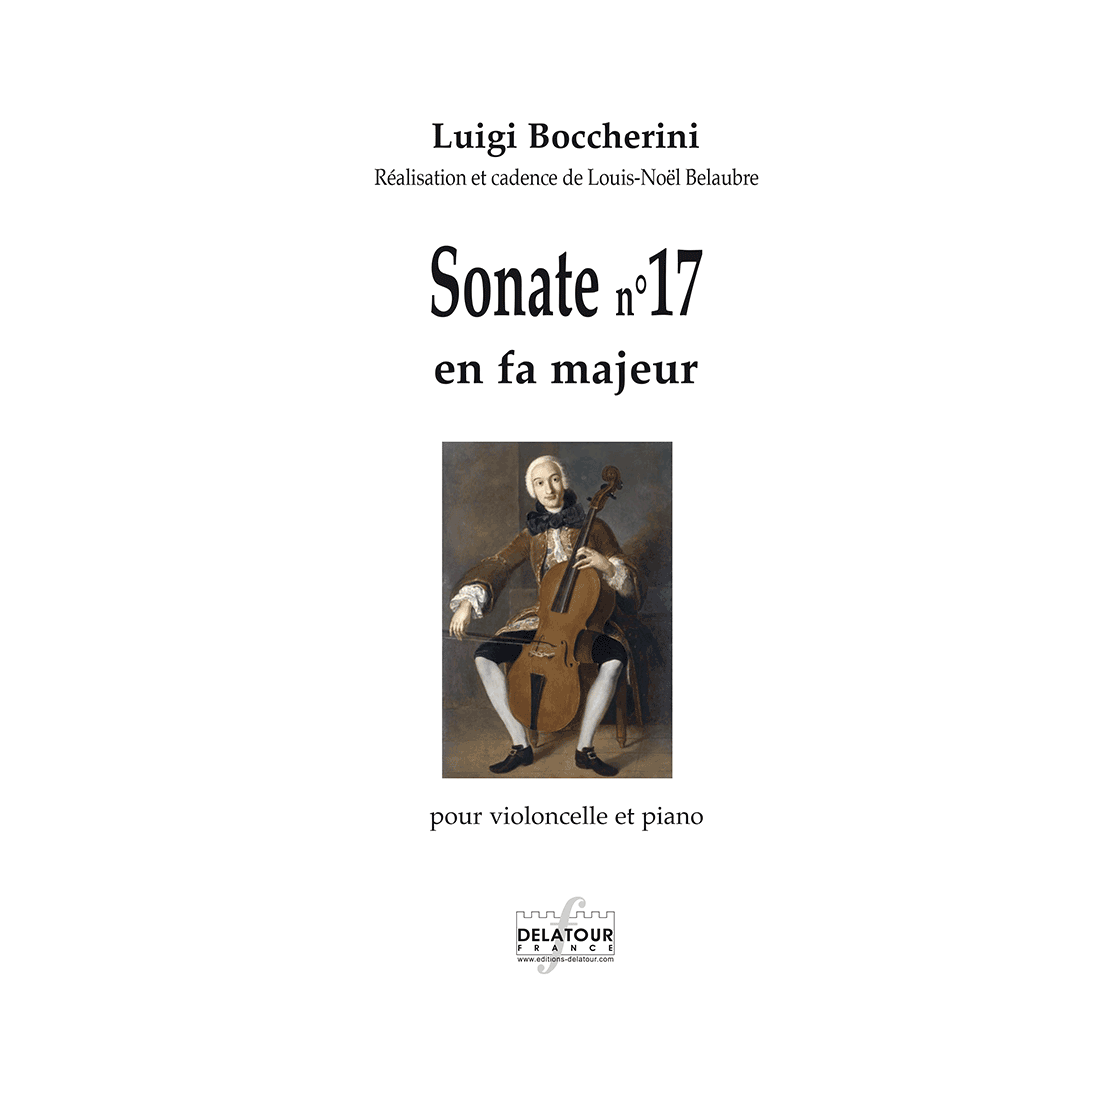 Sonate n°17 en fa majeur for cello and piano